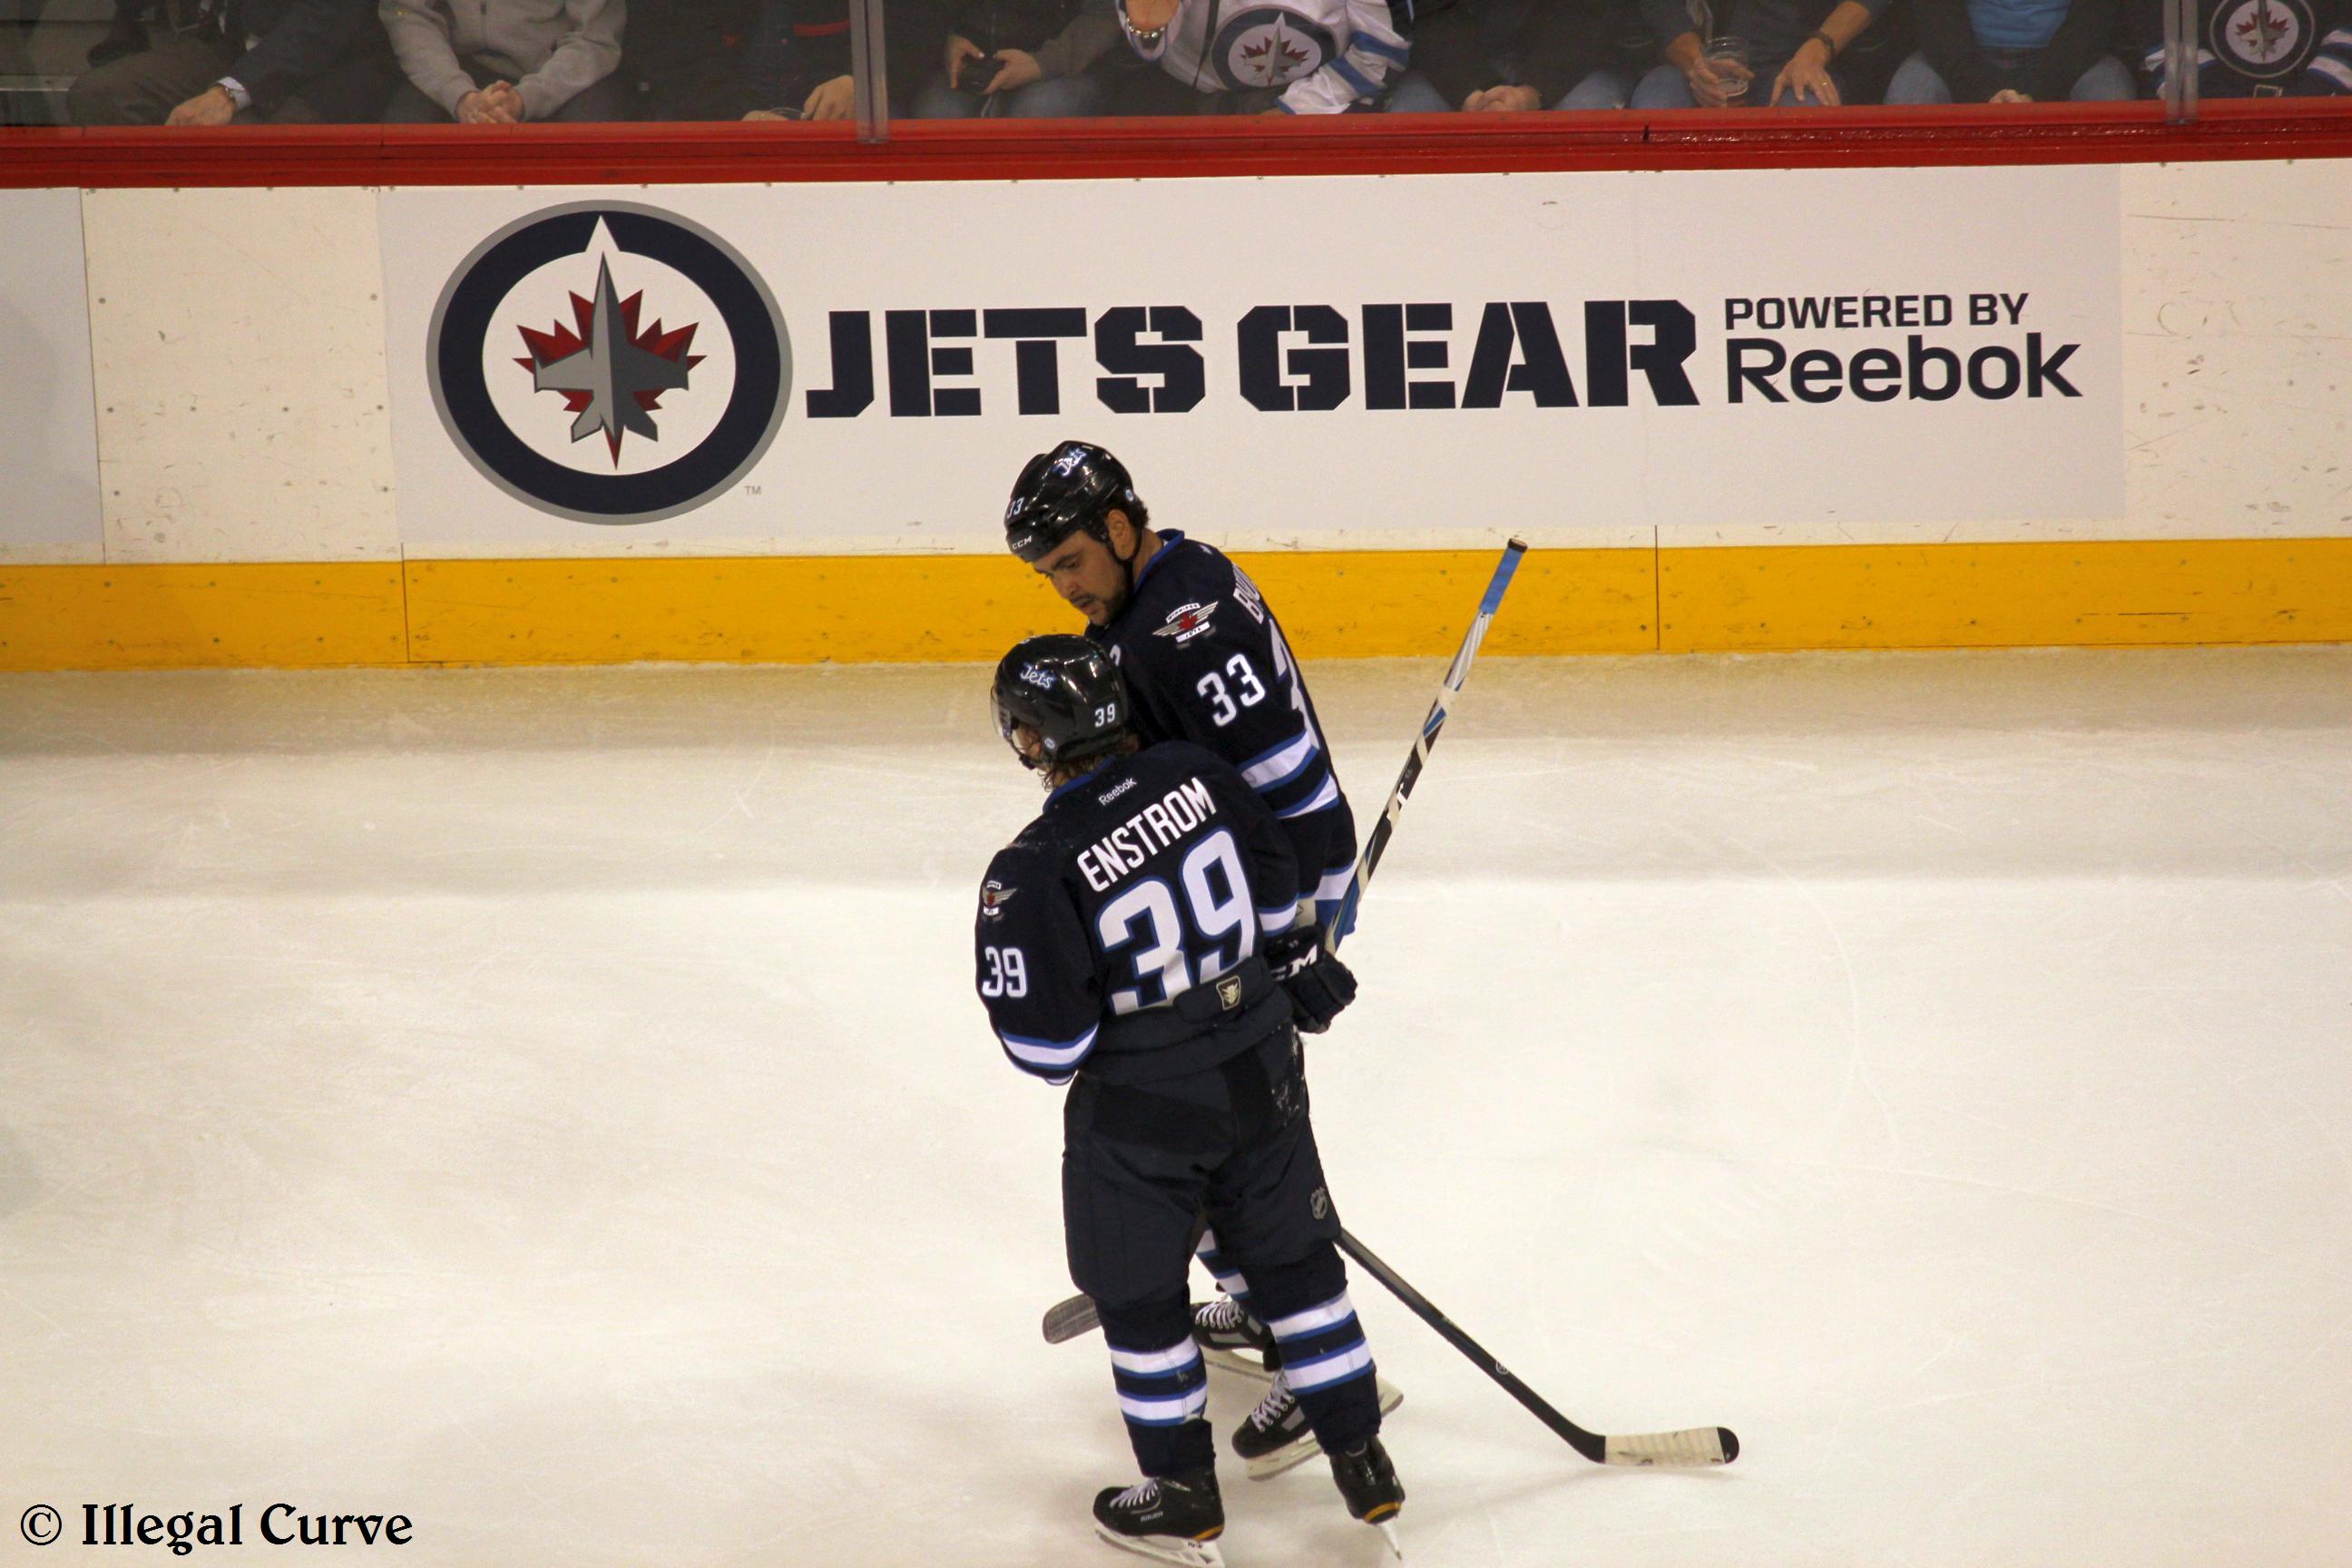 Enstrom and Buff